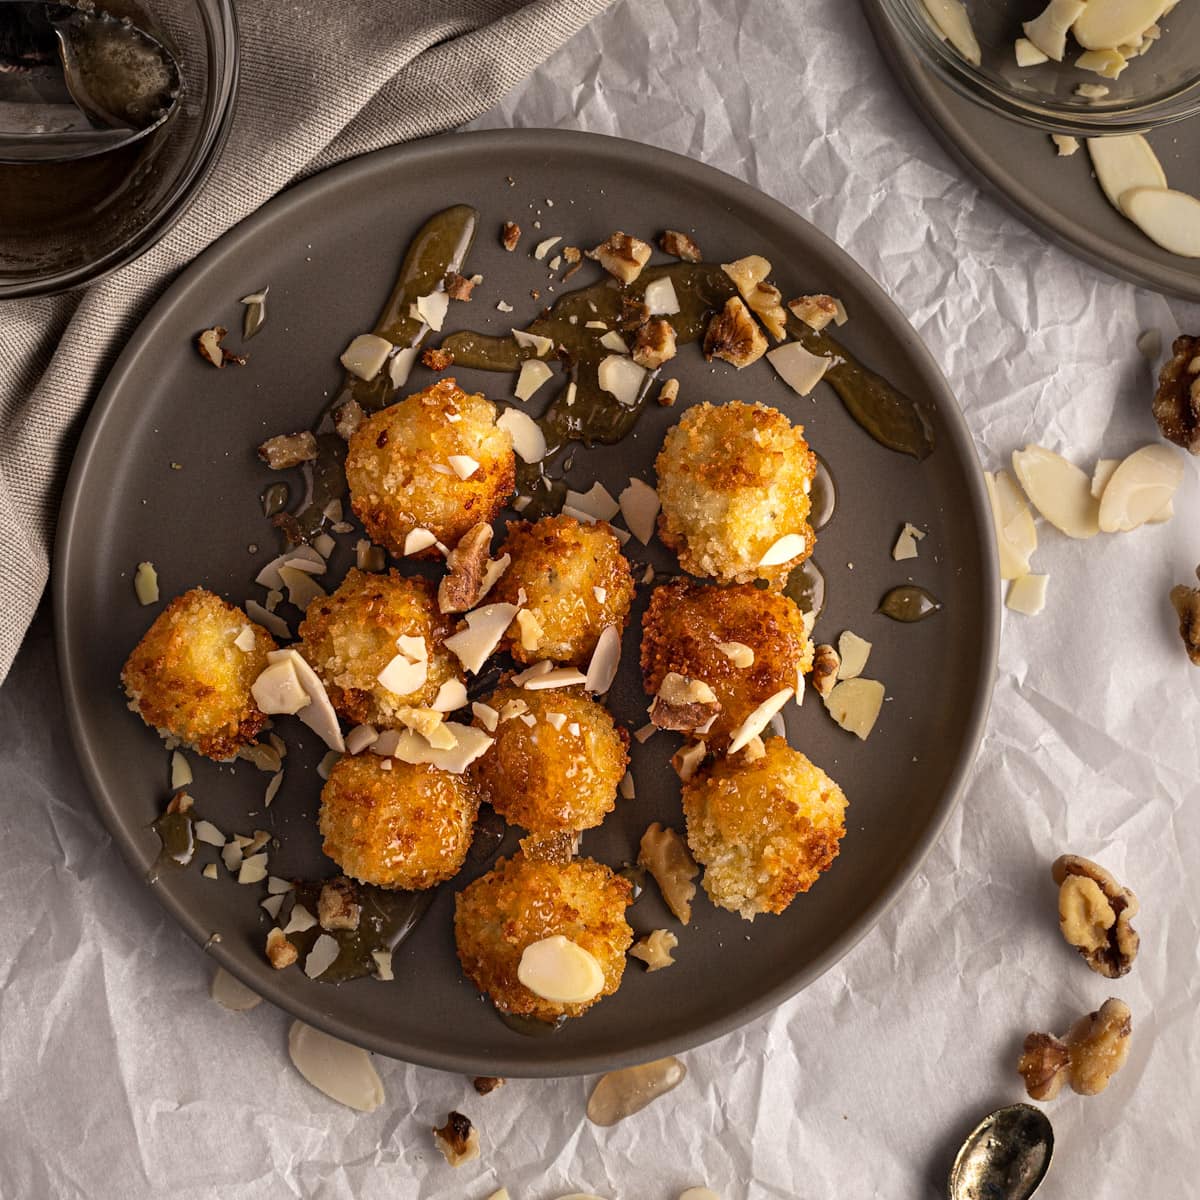 Crispy golden small cheese balls on a gray plate drizzled with syrup or honey and sprinkled with slivered almonds.